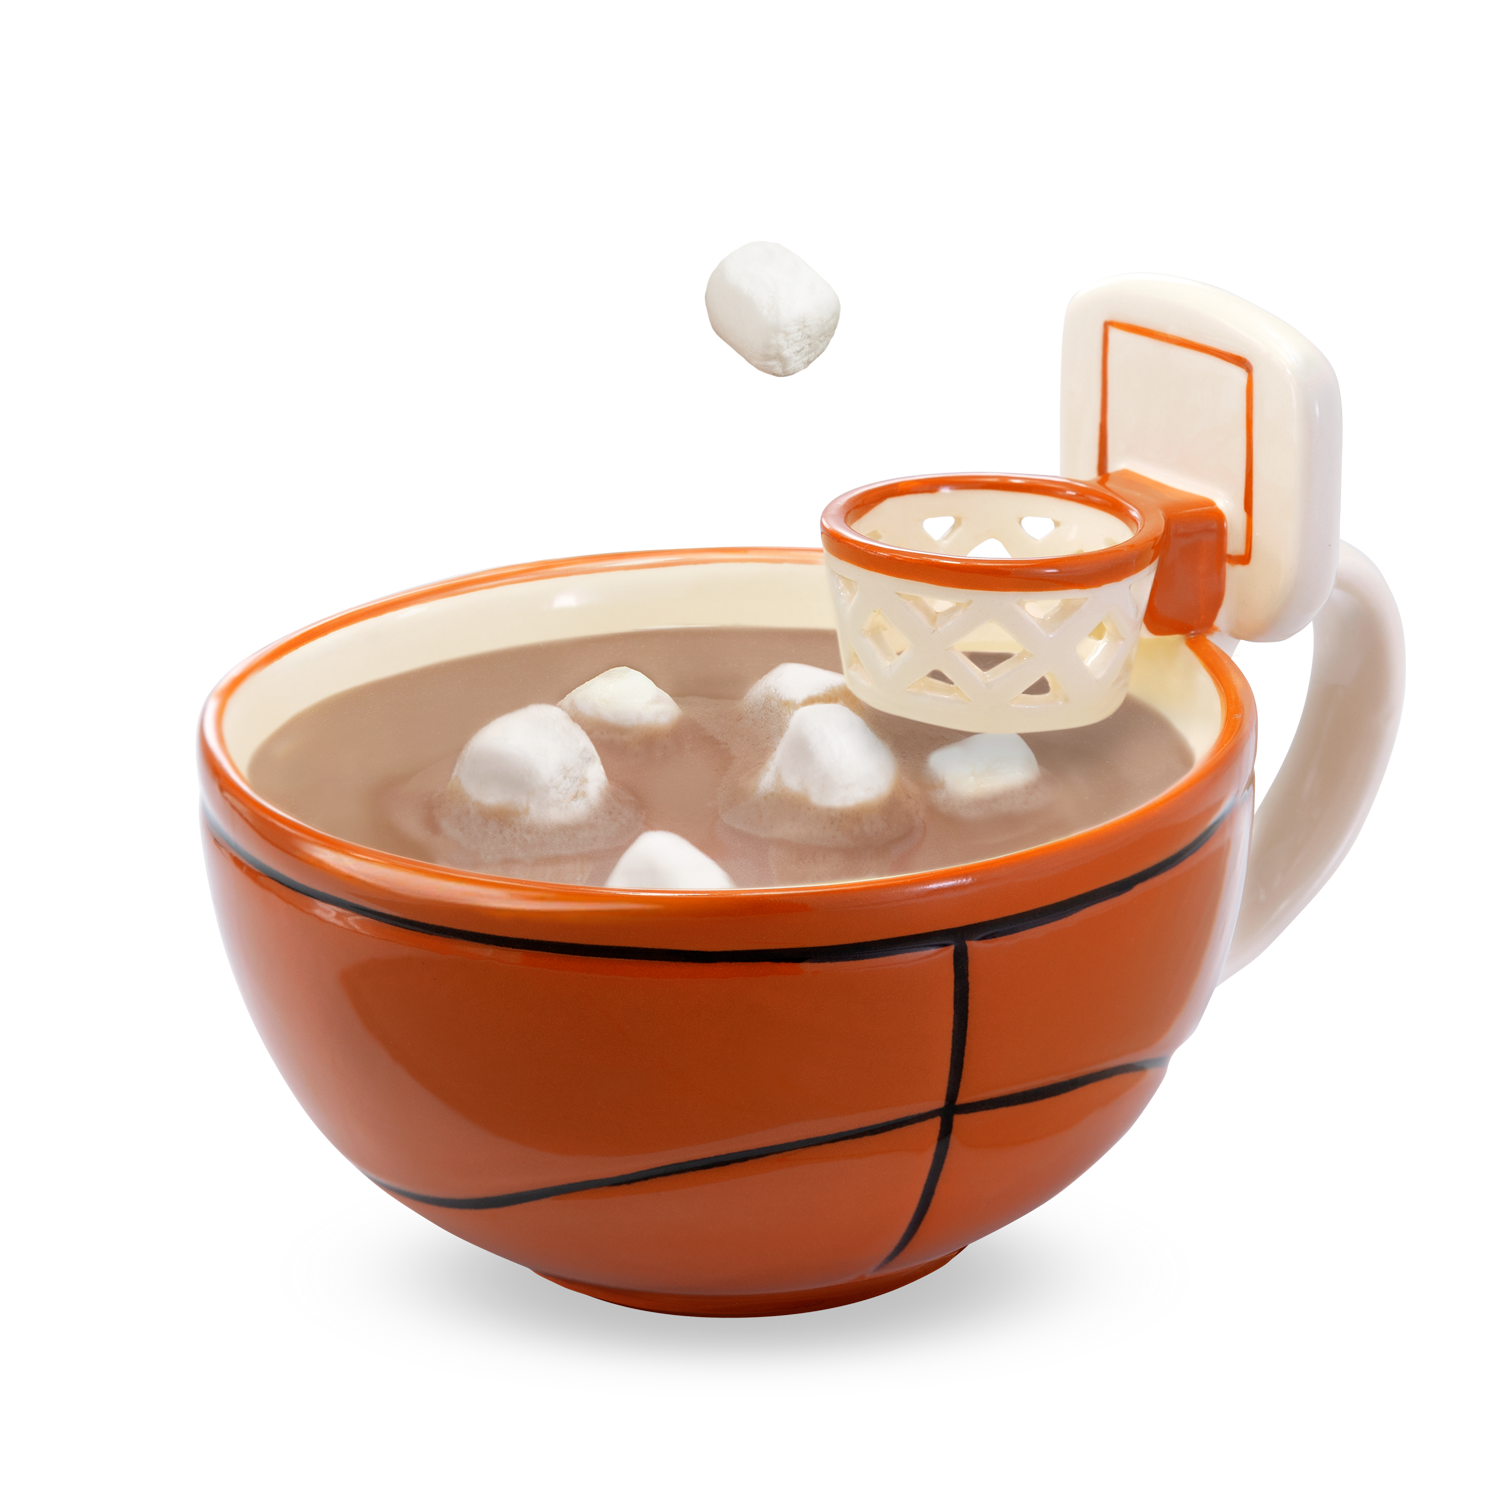 The basketball mug with a hoop! START YOUR MORNINGS WITH FUN! Play with your food with this original basketball mug with an attached hoop. Perfect for scoring mini-marshmallows into cocoa, cereal into milk, crackers into soup, or toppings onto ice cream! Something to root for in your morning routine!